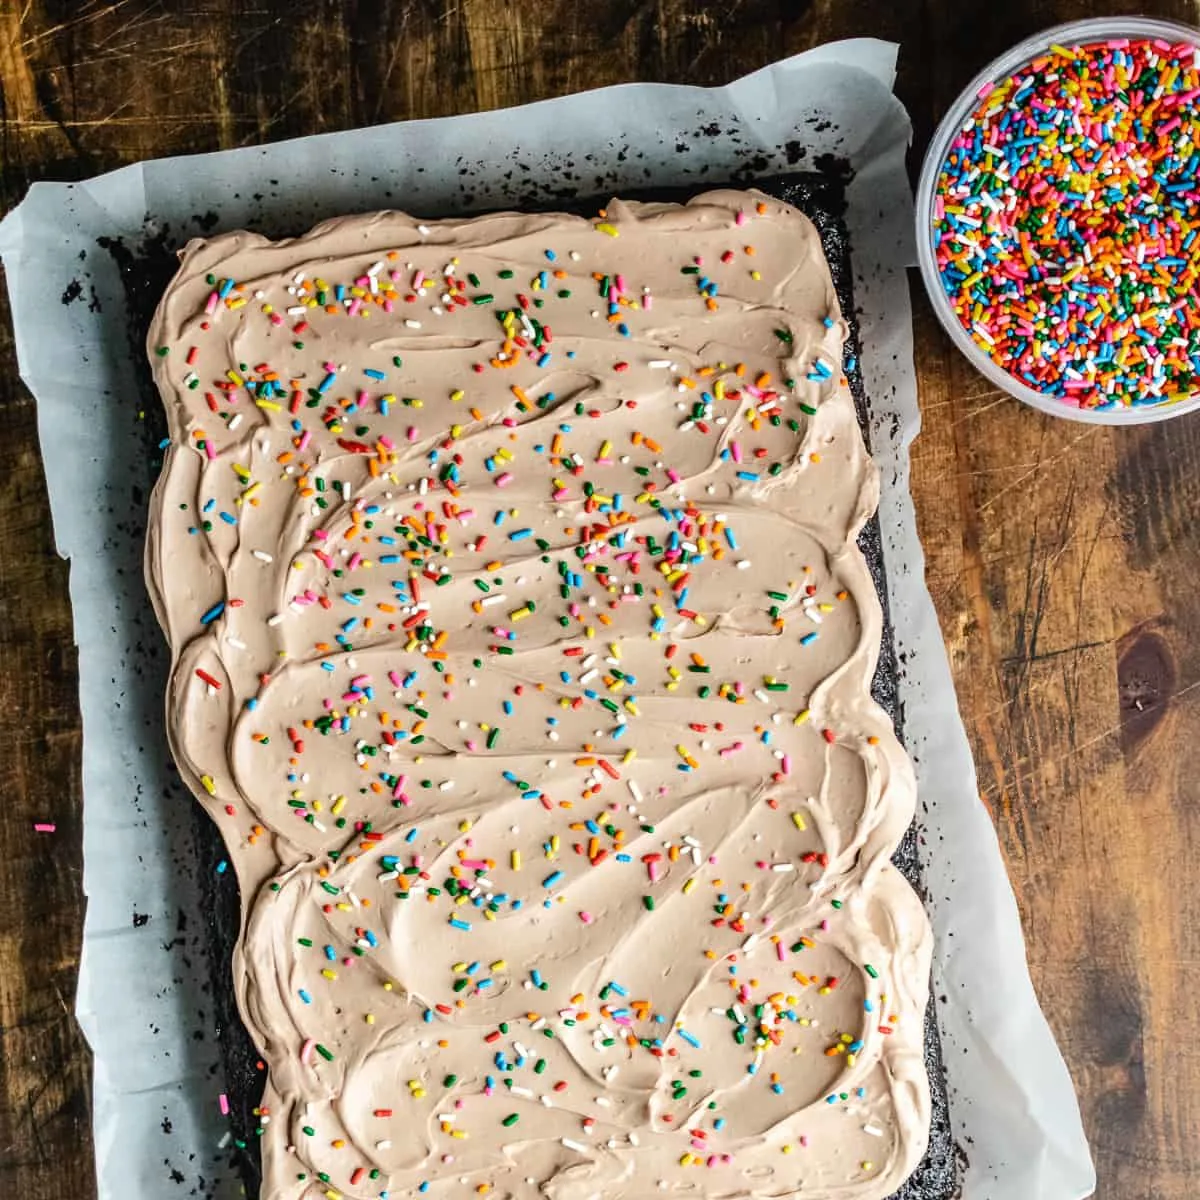 A chocolate cake with chocolate frosting and colorful sprinkles. 